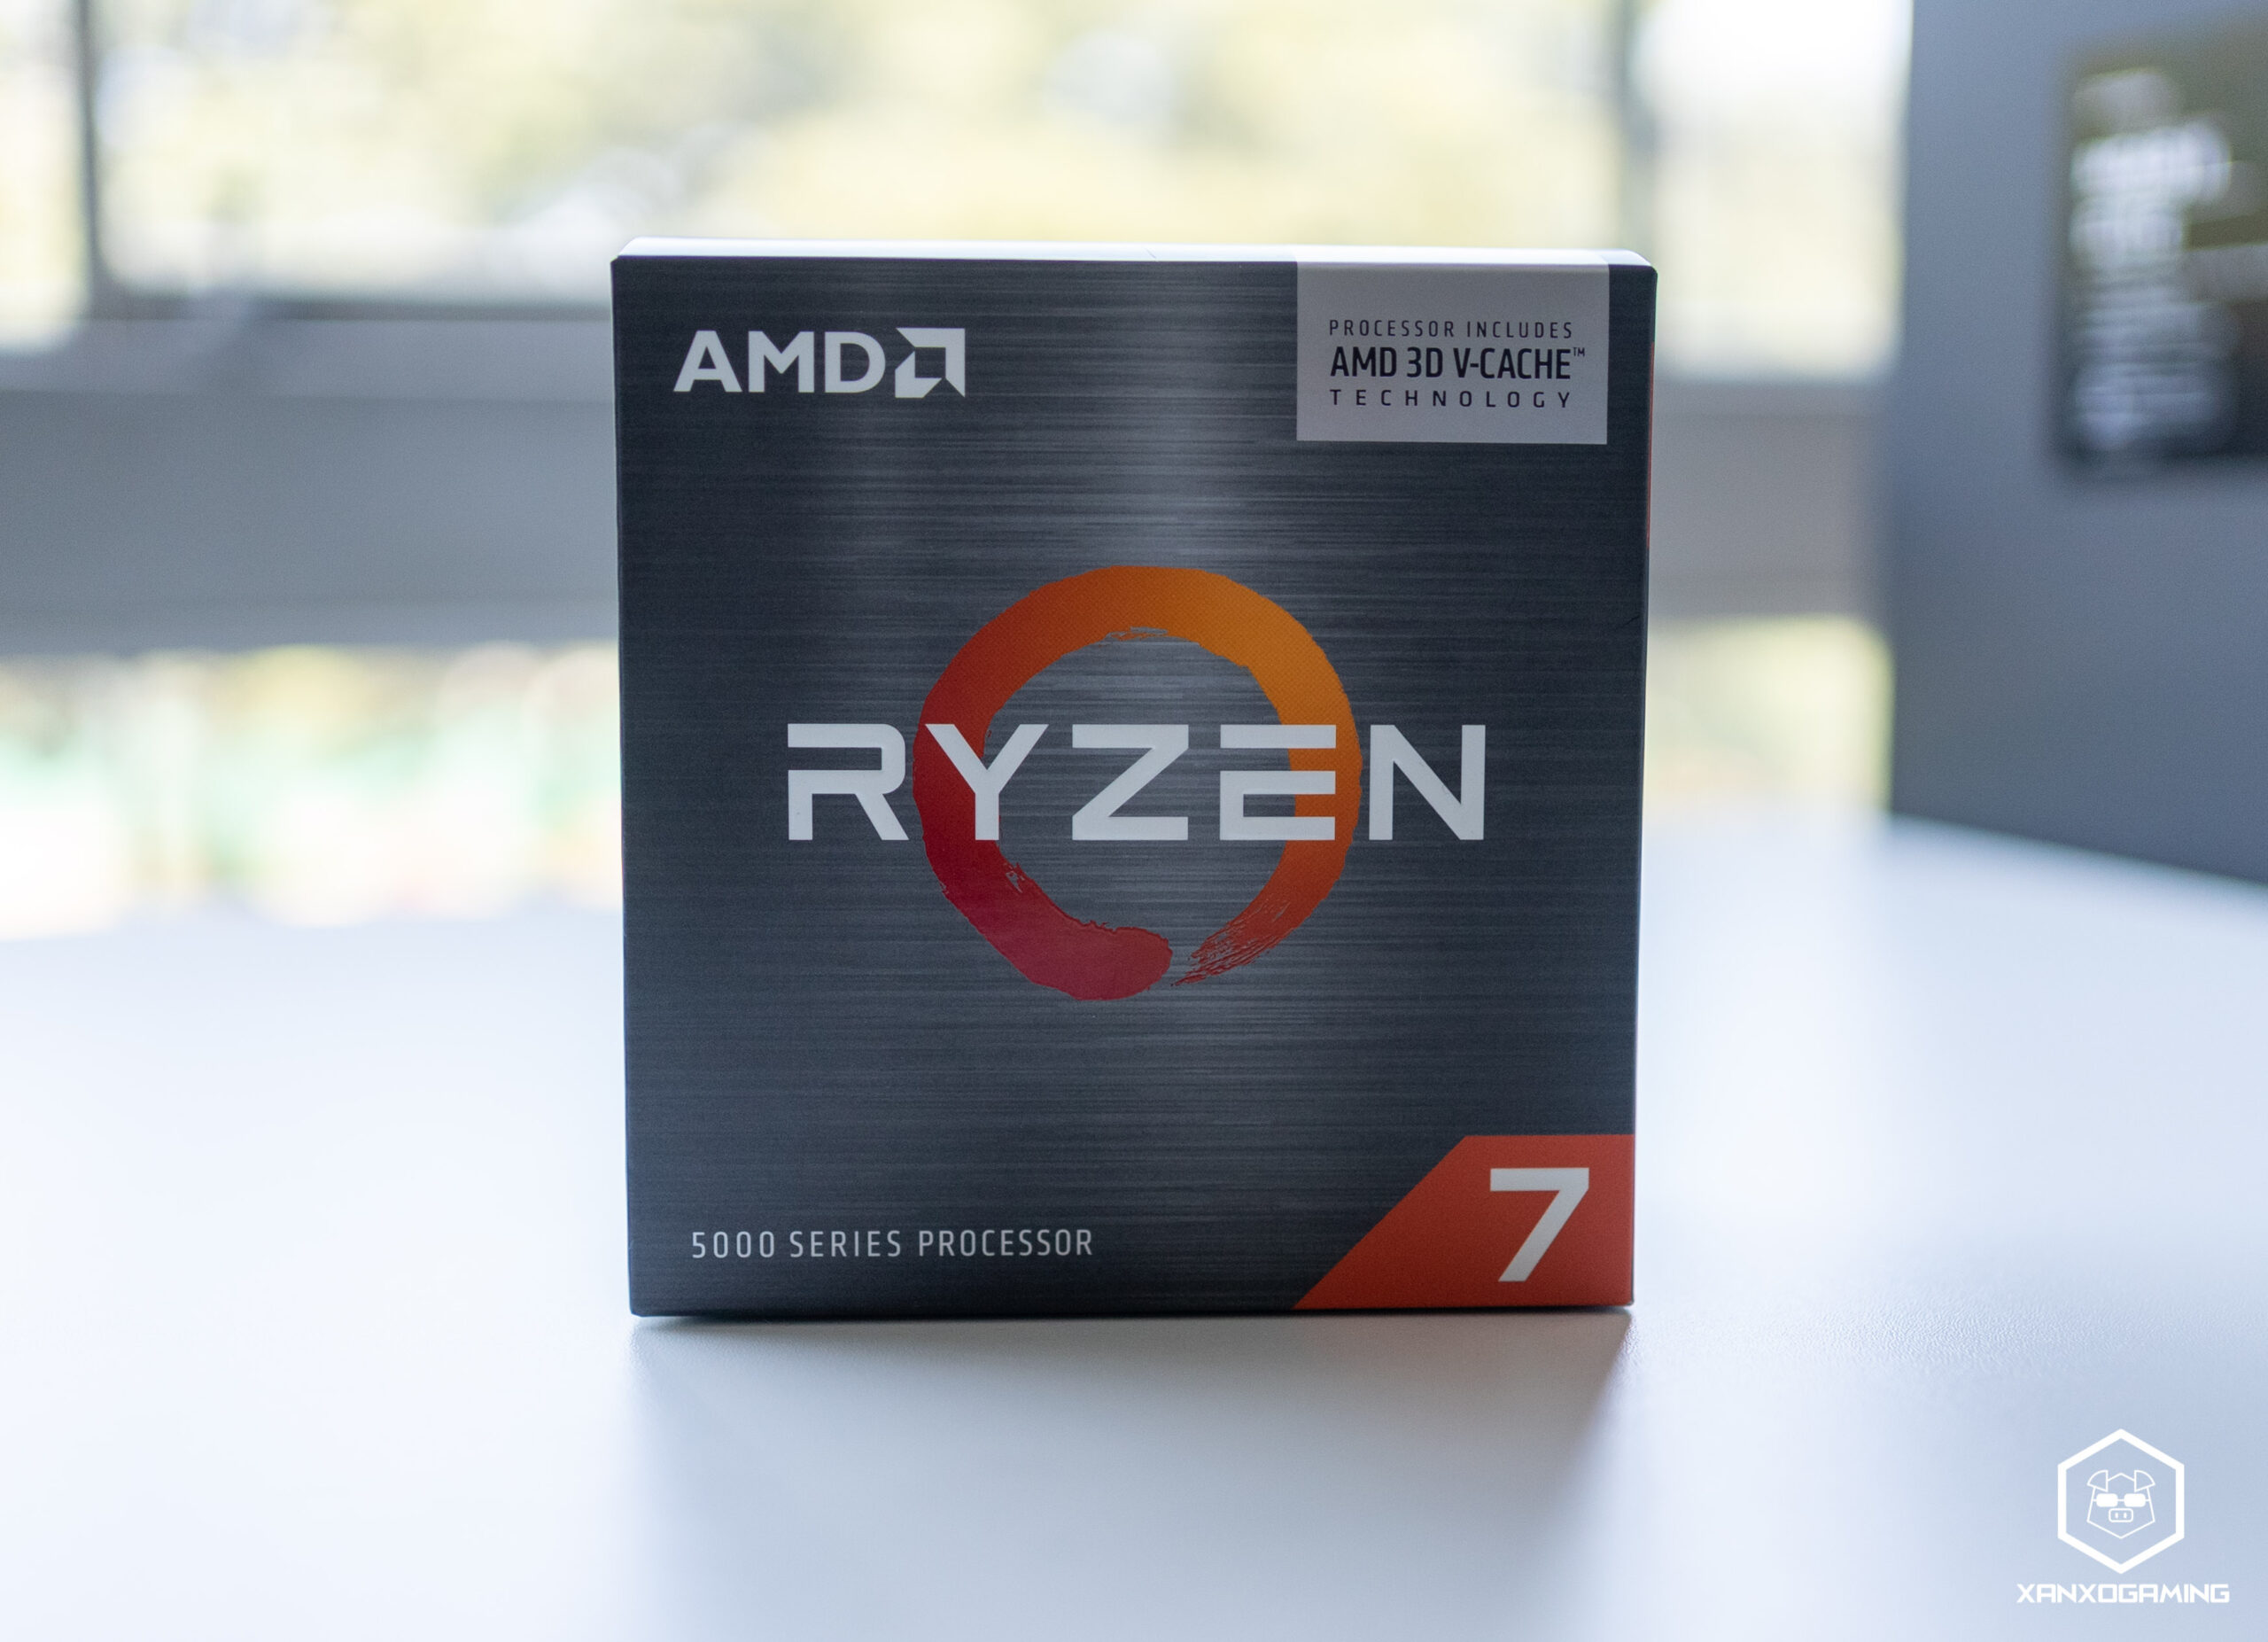 AMD Ryzen 7 5800X3D retail processor has been tested ahead of 